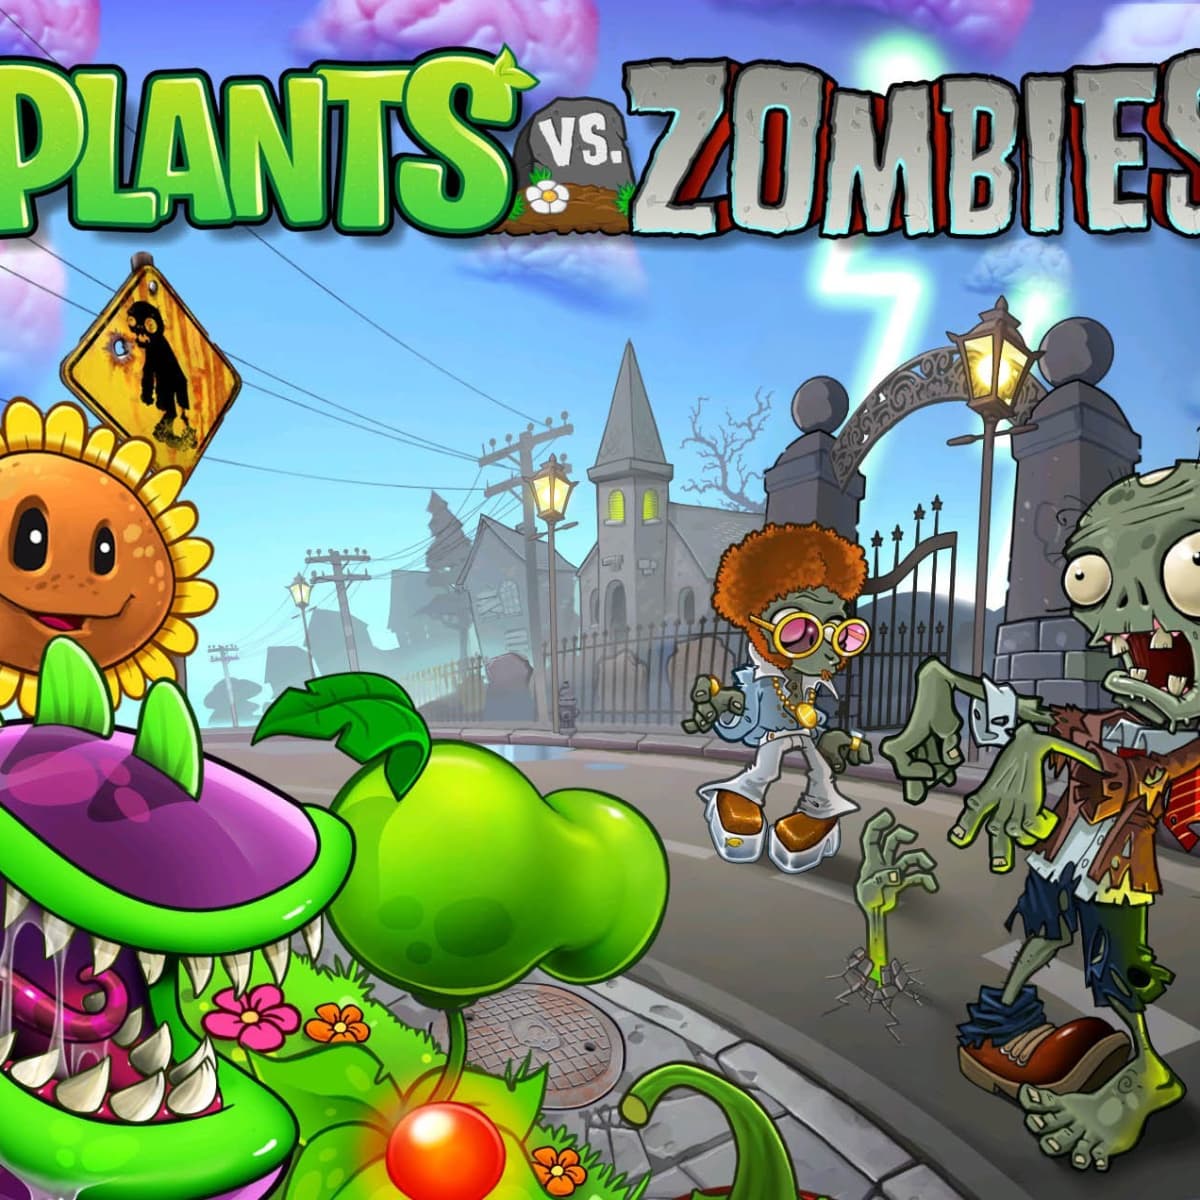 What are some useful and interesting PVZ2 (Plants vs Zombies 2